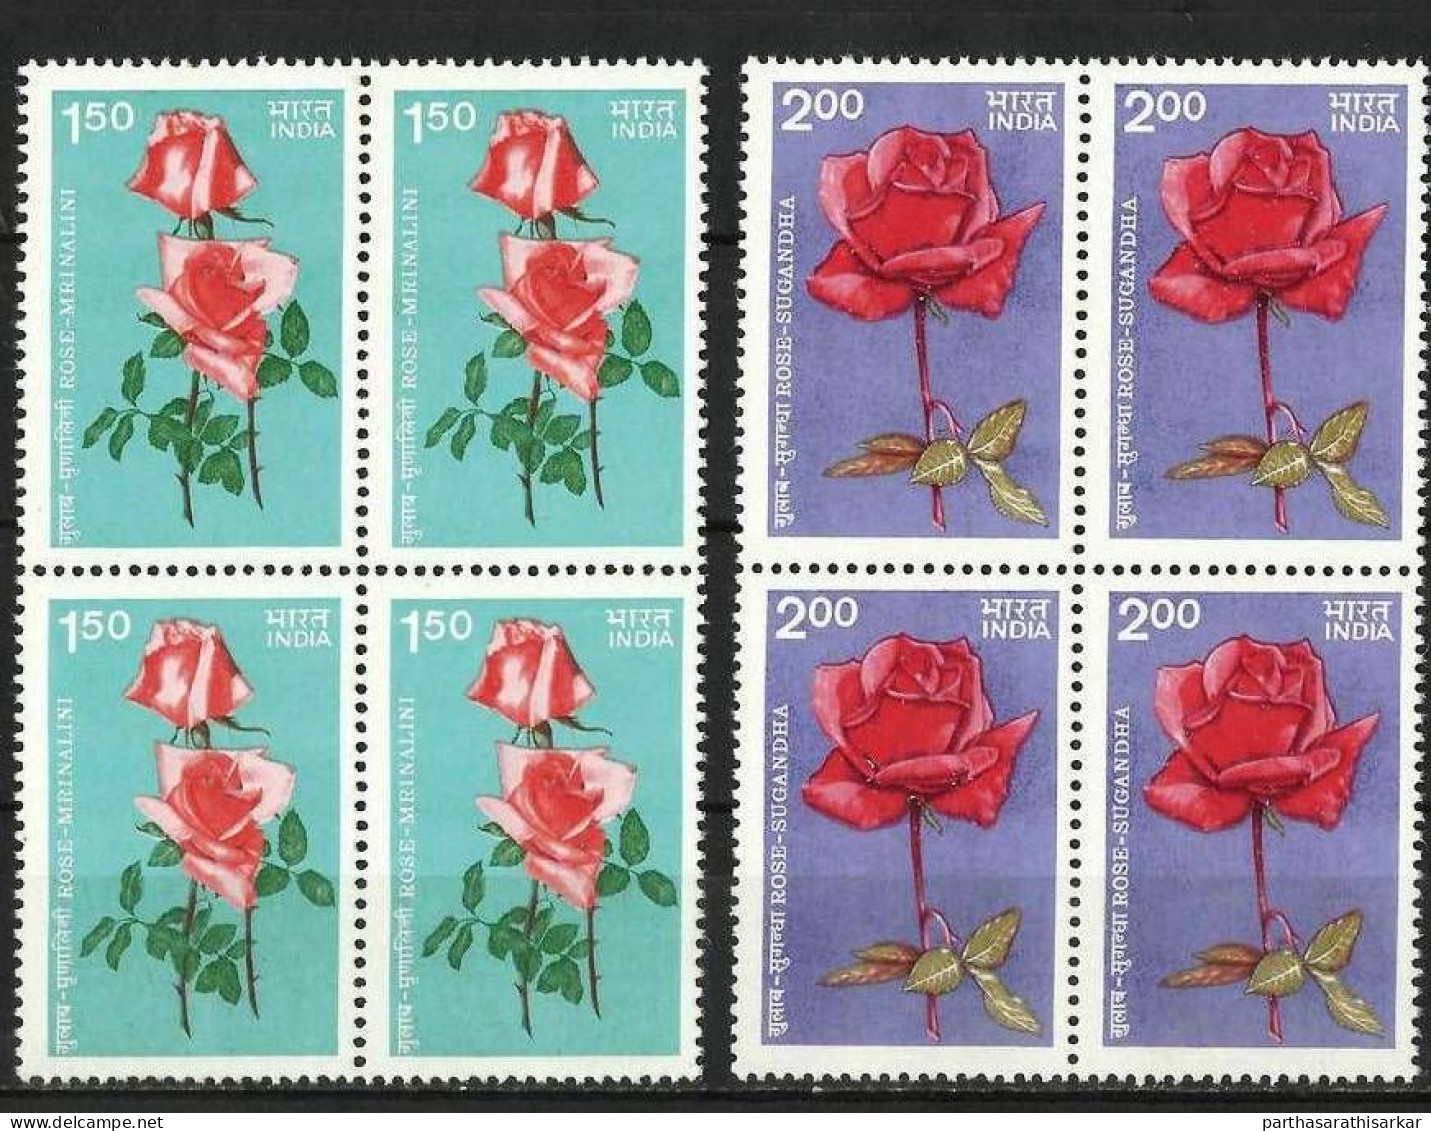 INDIA 1984 ROSES COMPLETE SET BLOCK OF 4 MNH - Ungebraucht